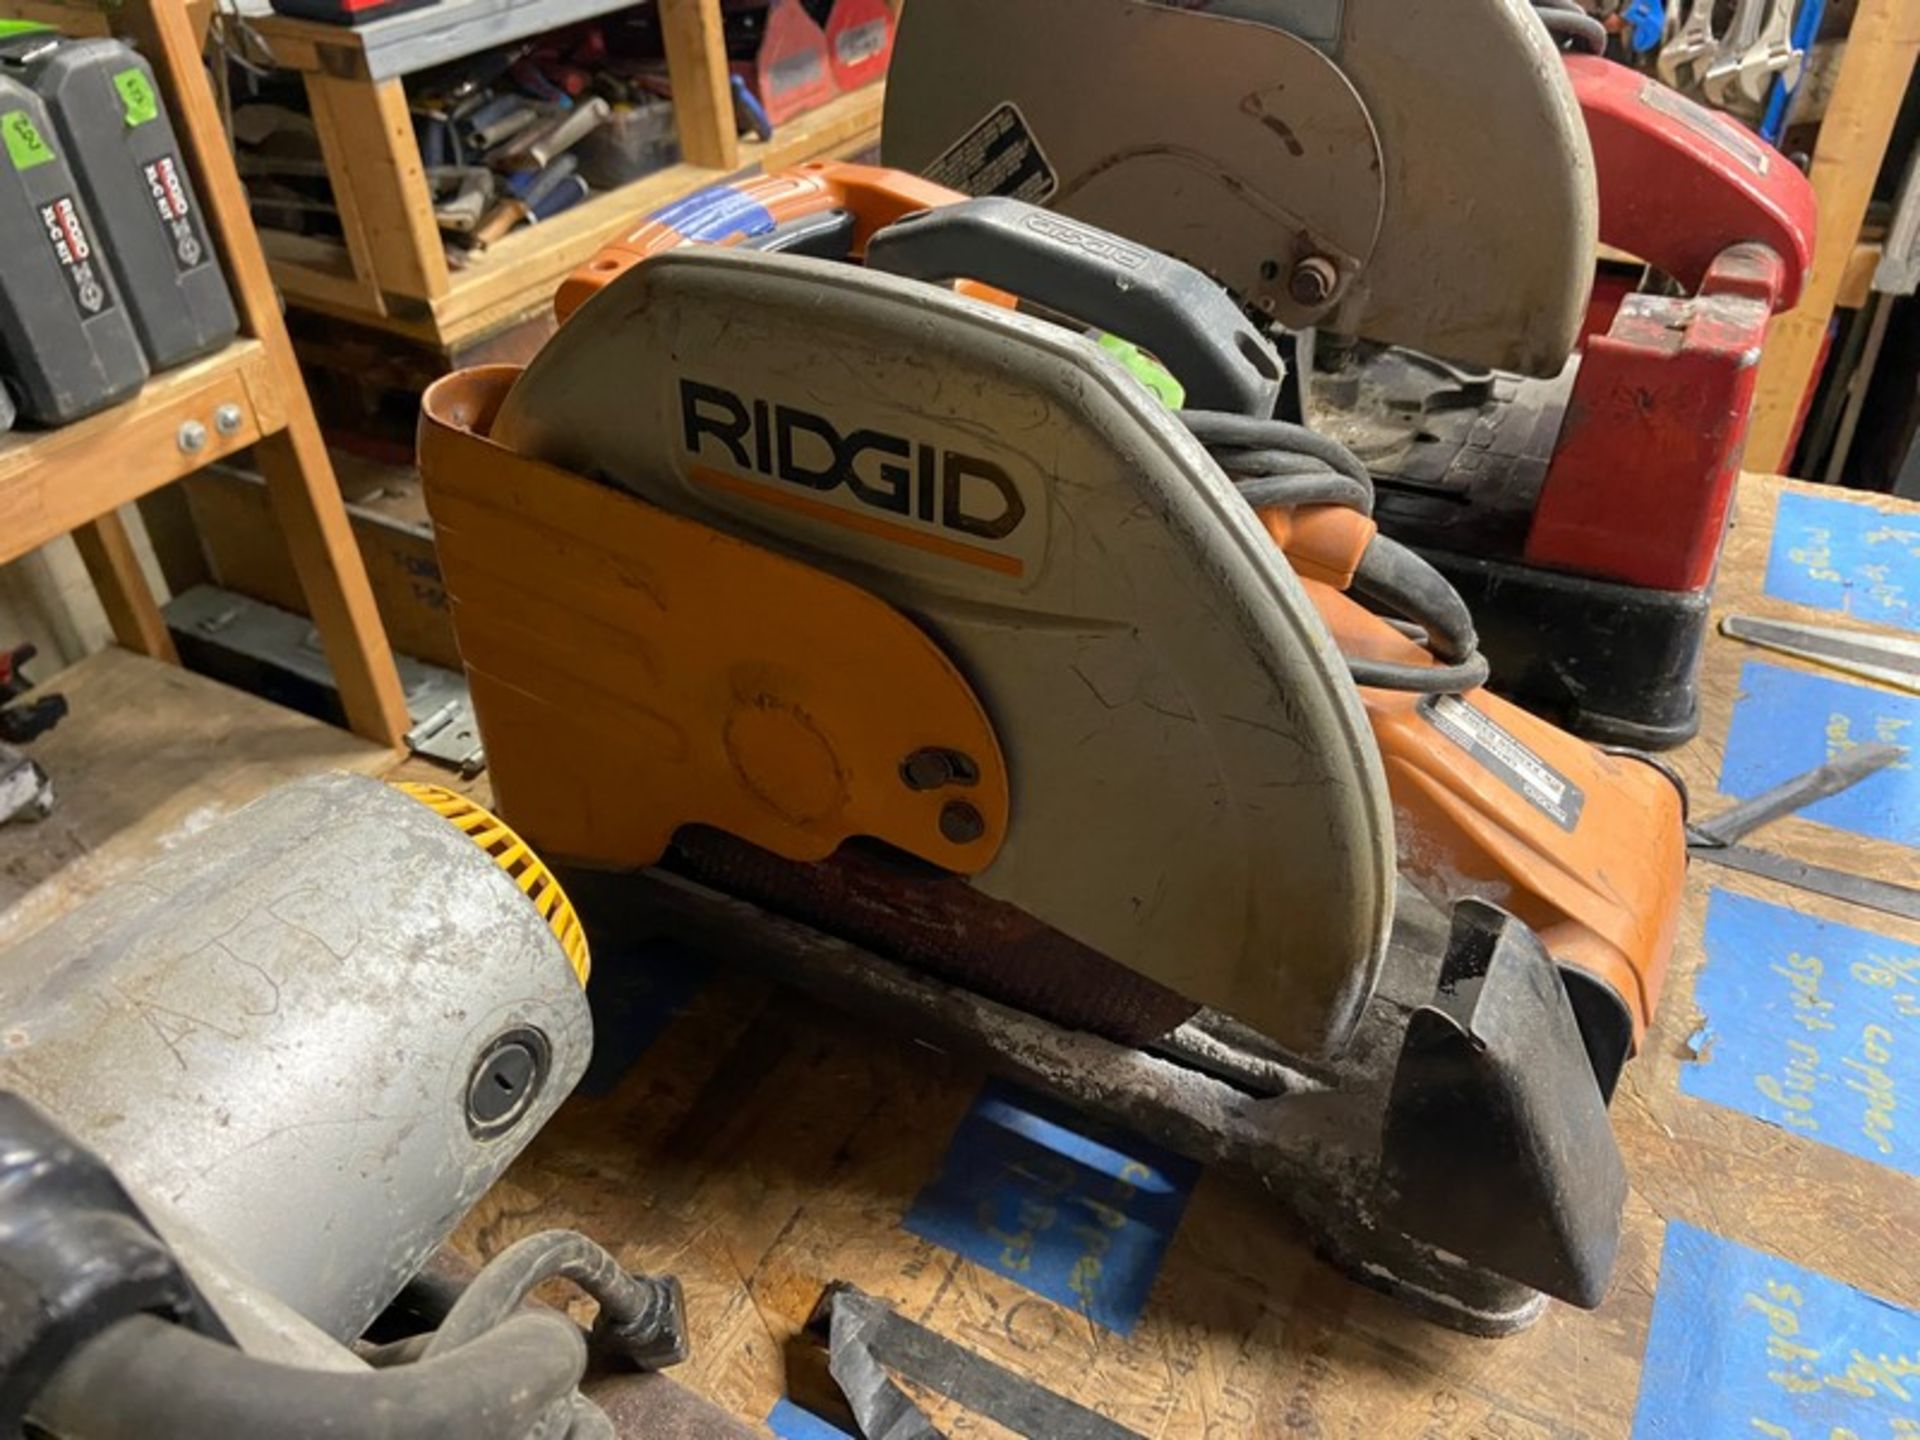 Rigid 14” Abrasive Chop Saw, M/N CM14500, S/N XX065 83302, with Blade (LOCATED IN MONROEVILLE, PA)( - Image 9 of 12